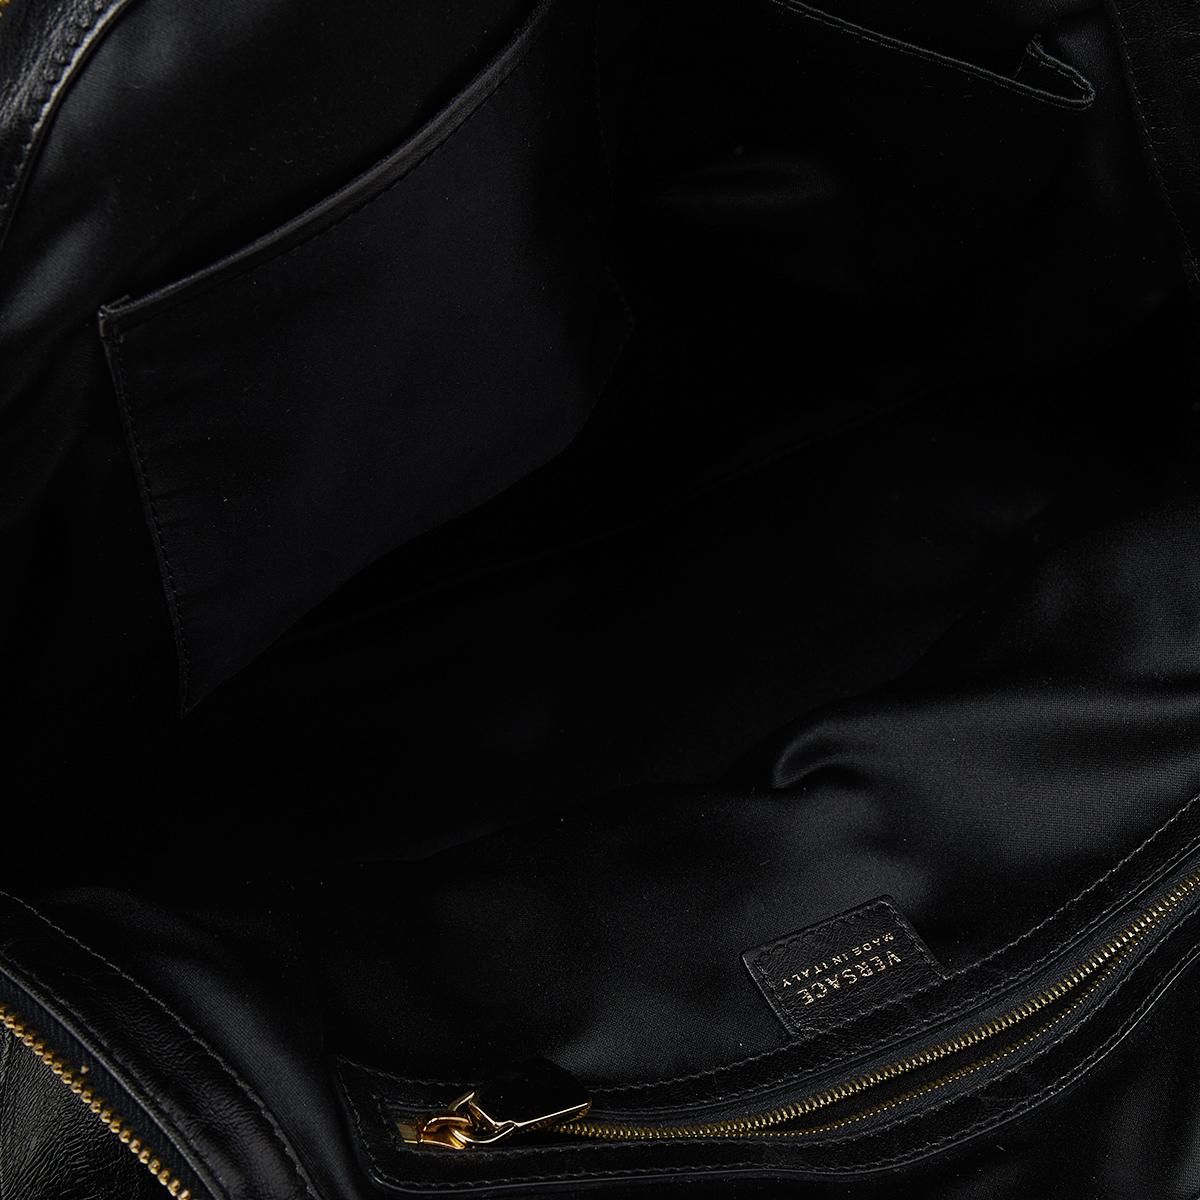 Designed from leather, this Versace satchel in black will complement your everyday look. It features two flat handles, the brand plaque at the front, metal studs to protect the base, and a spacious satin interior.

Includes: Original Dustbag